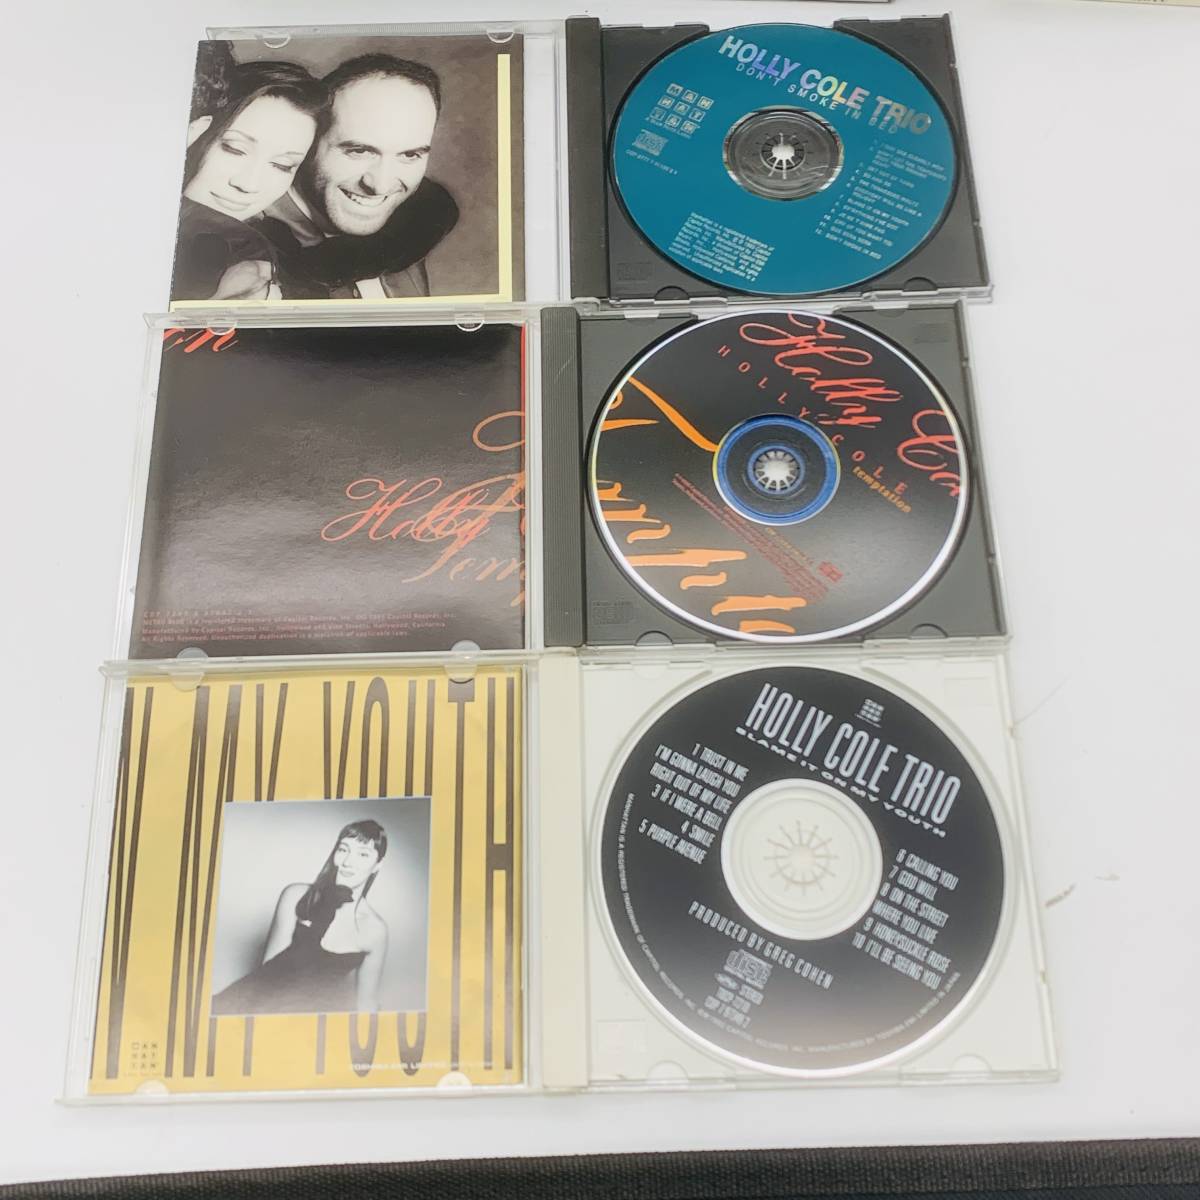 【HOLLY COLE】 TRIO CD DON'T SOMKE BED temptation BLAME IT ON MY YOUTH MANHATTAN 3枚 セット まとめの画像9